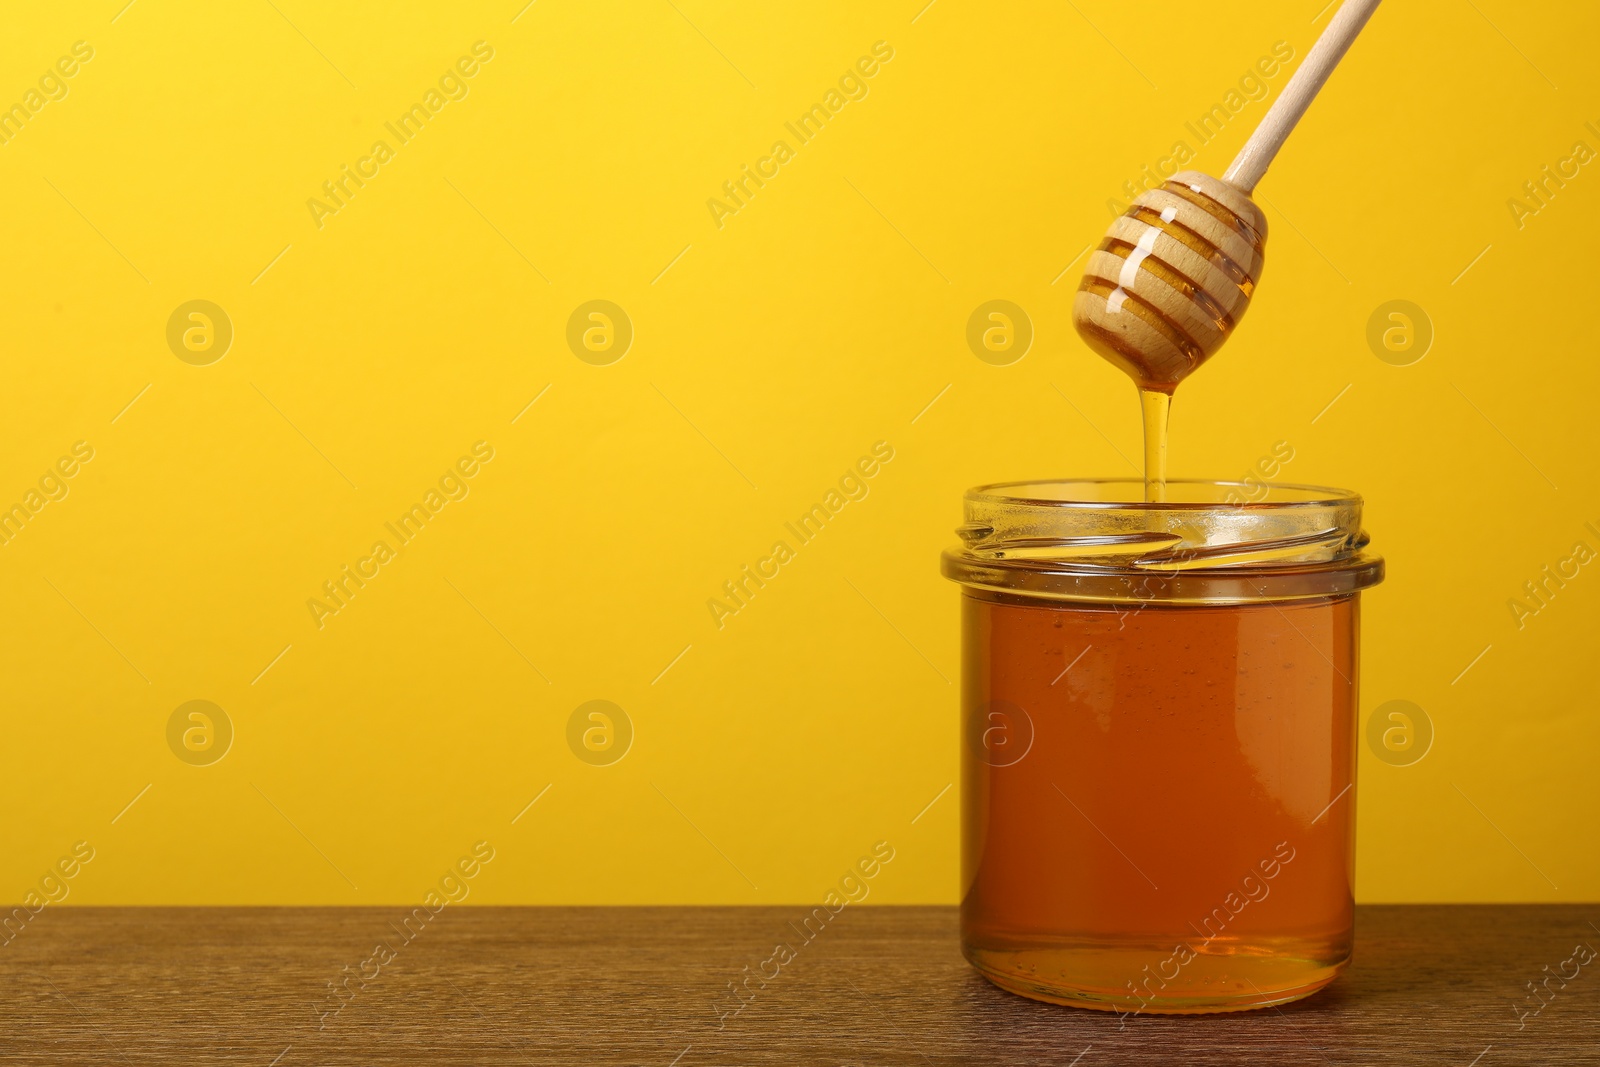 Photo of Pouring honey from dipper into jar at wooden table against yellow background, space for text